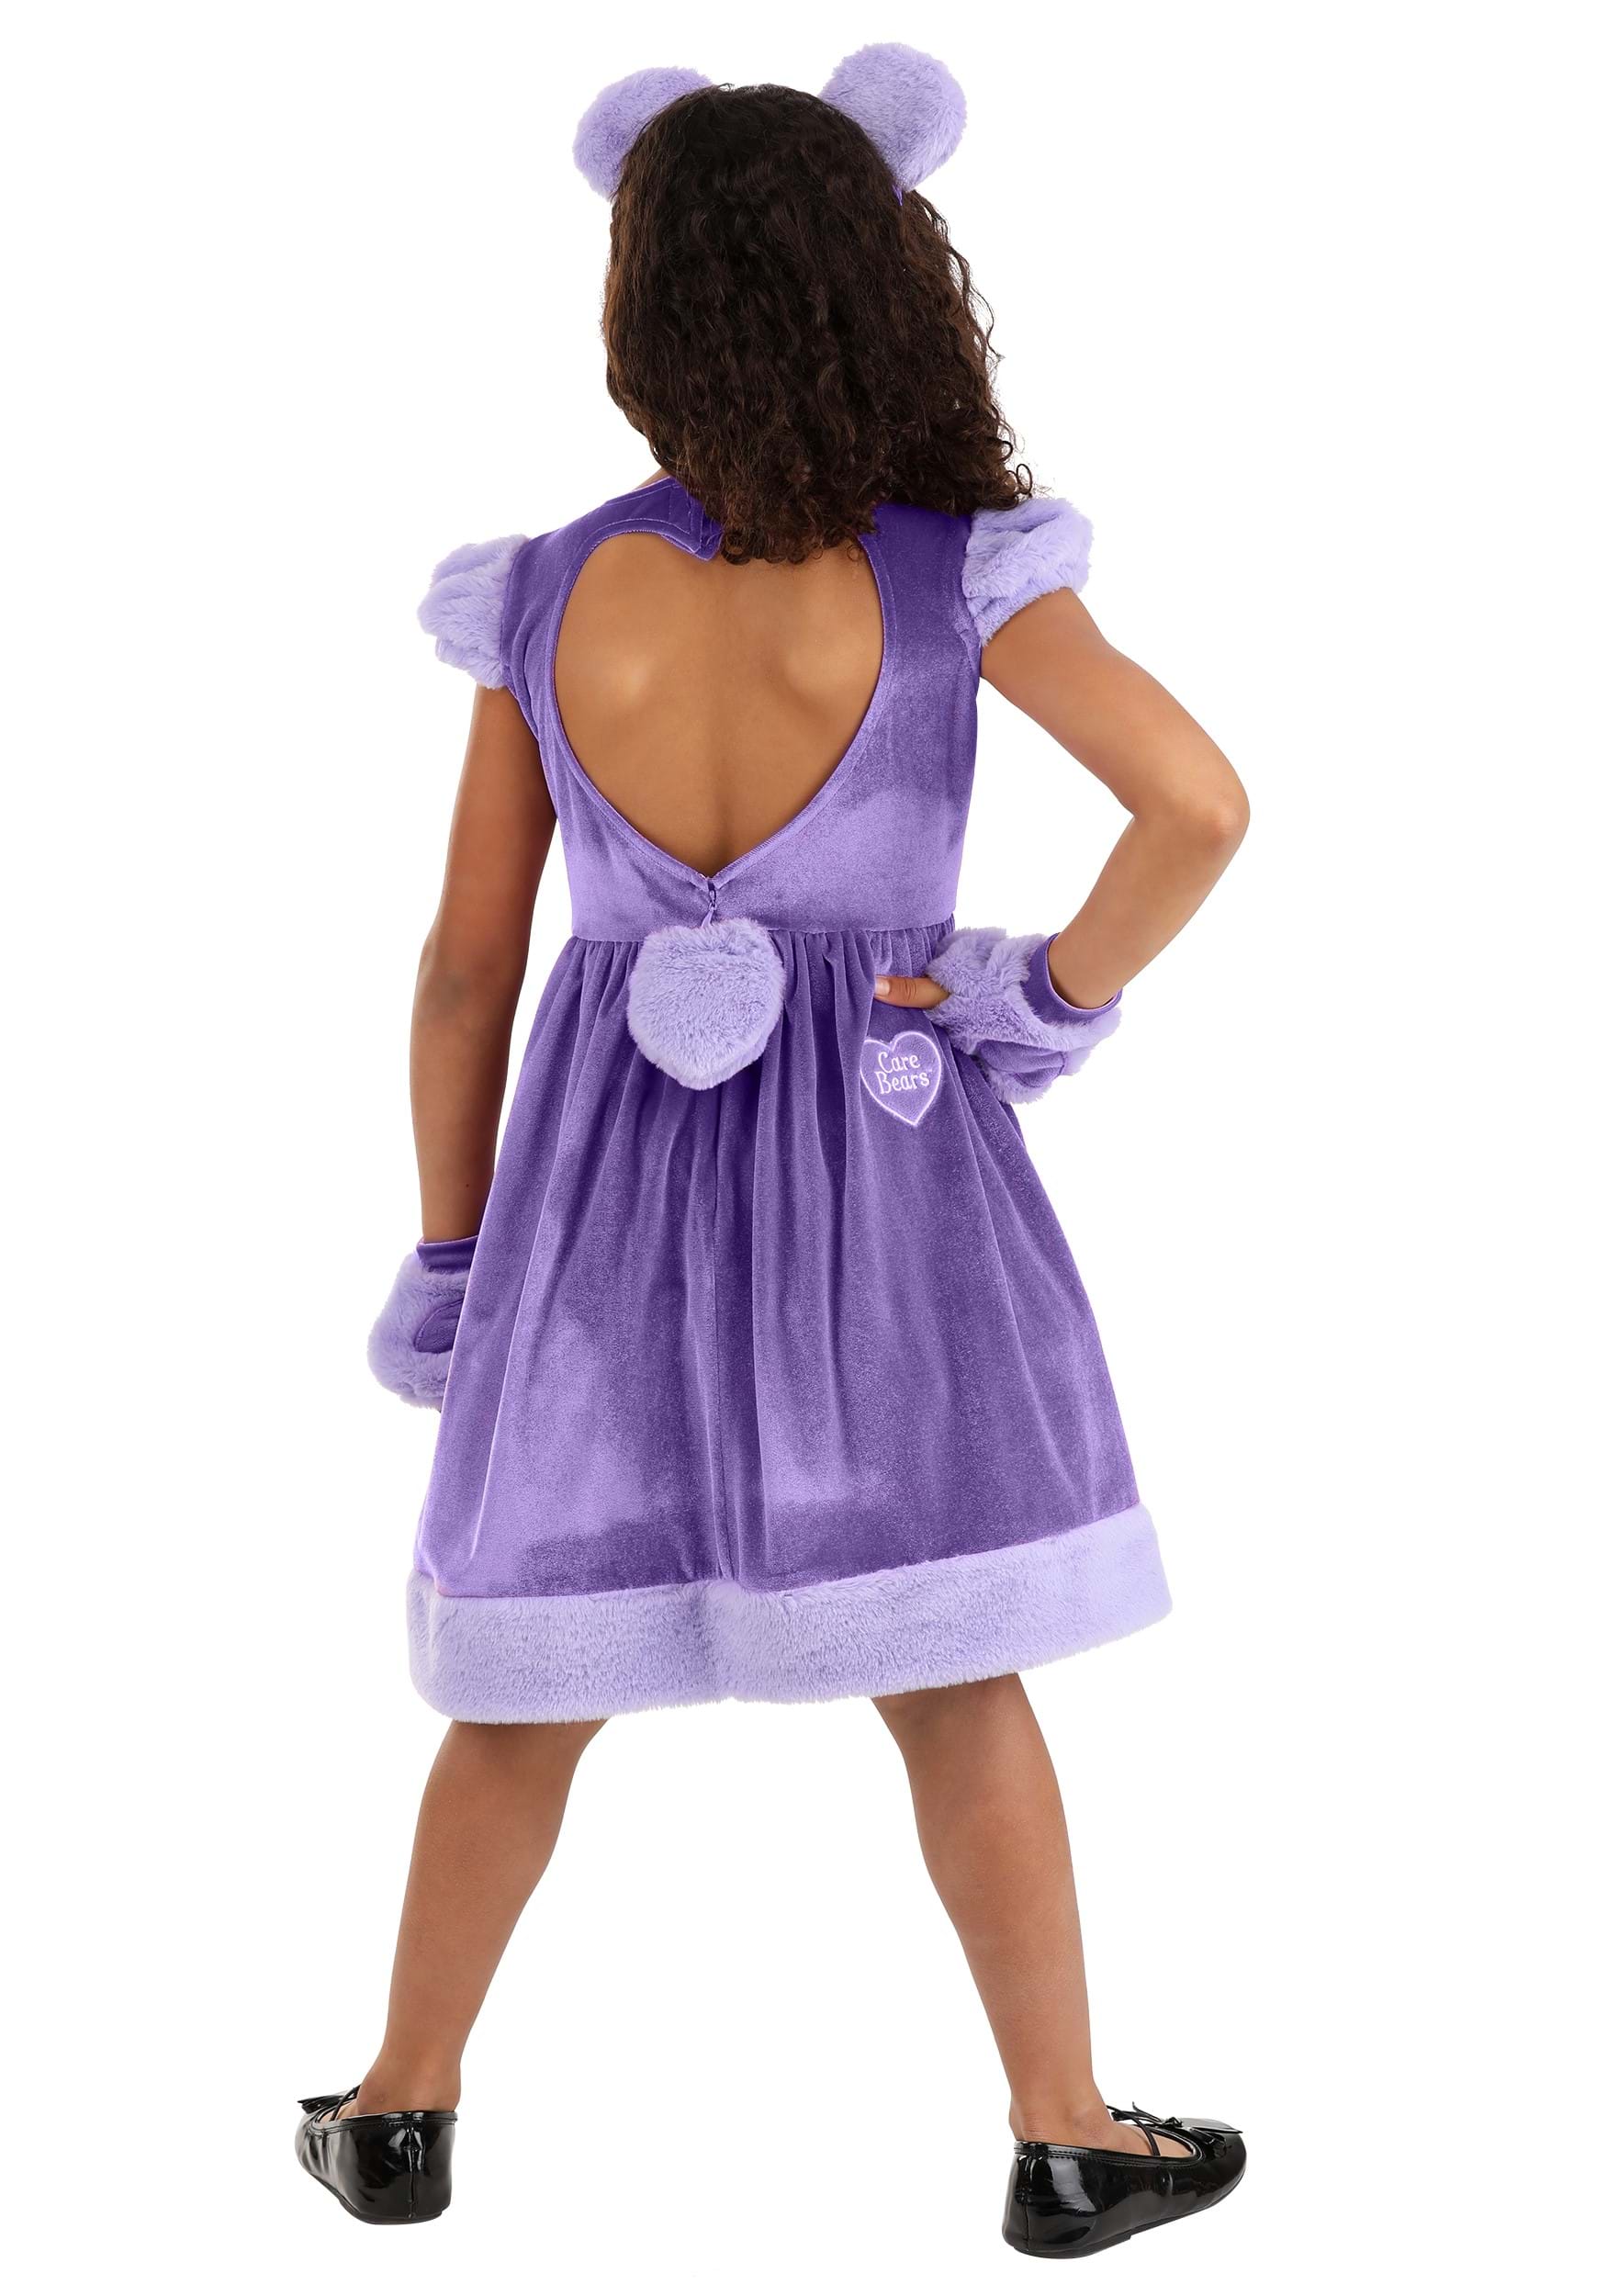 Share Bear Party Dress Costume For Girls